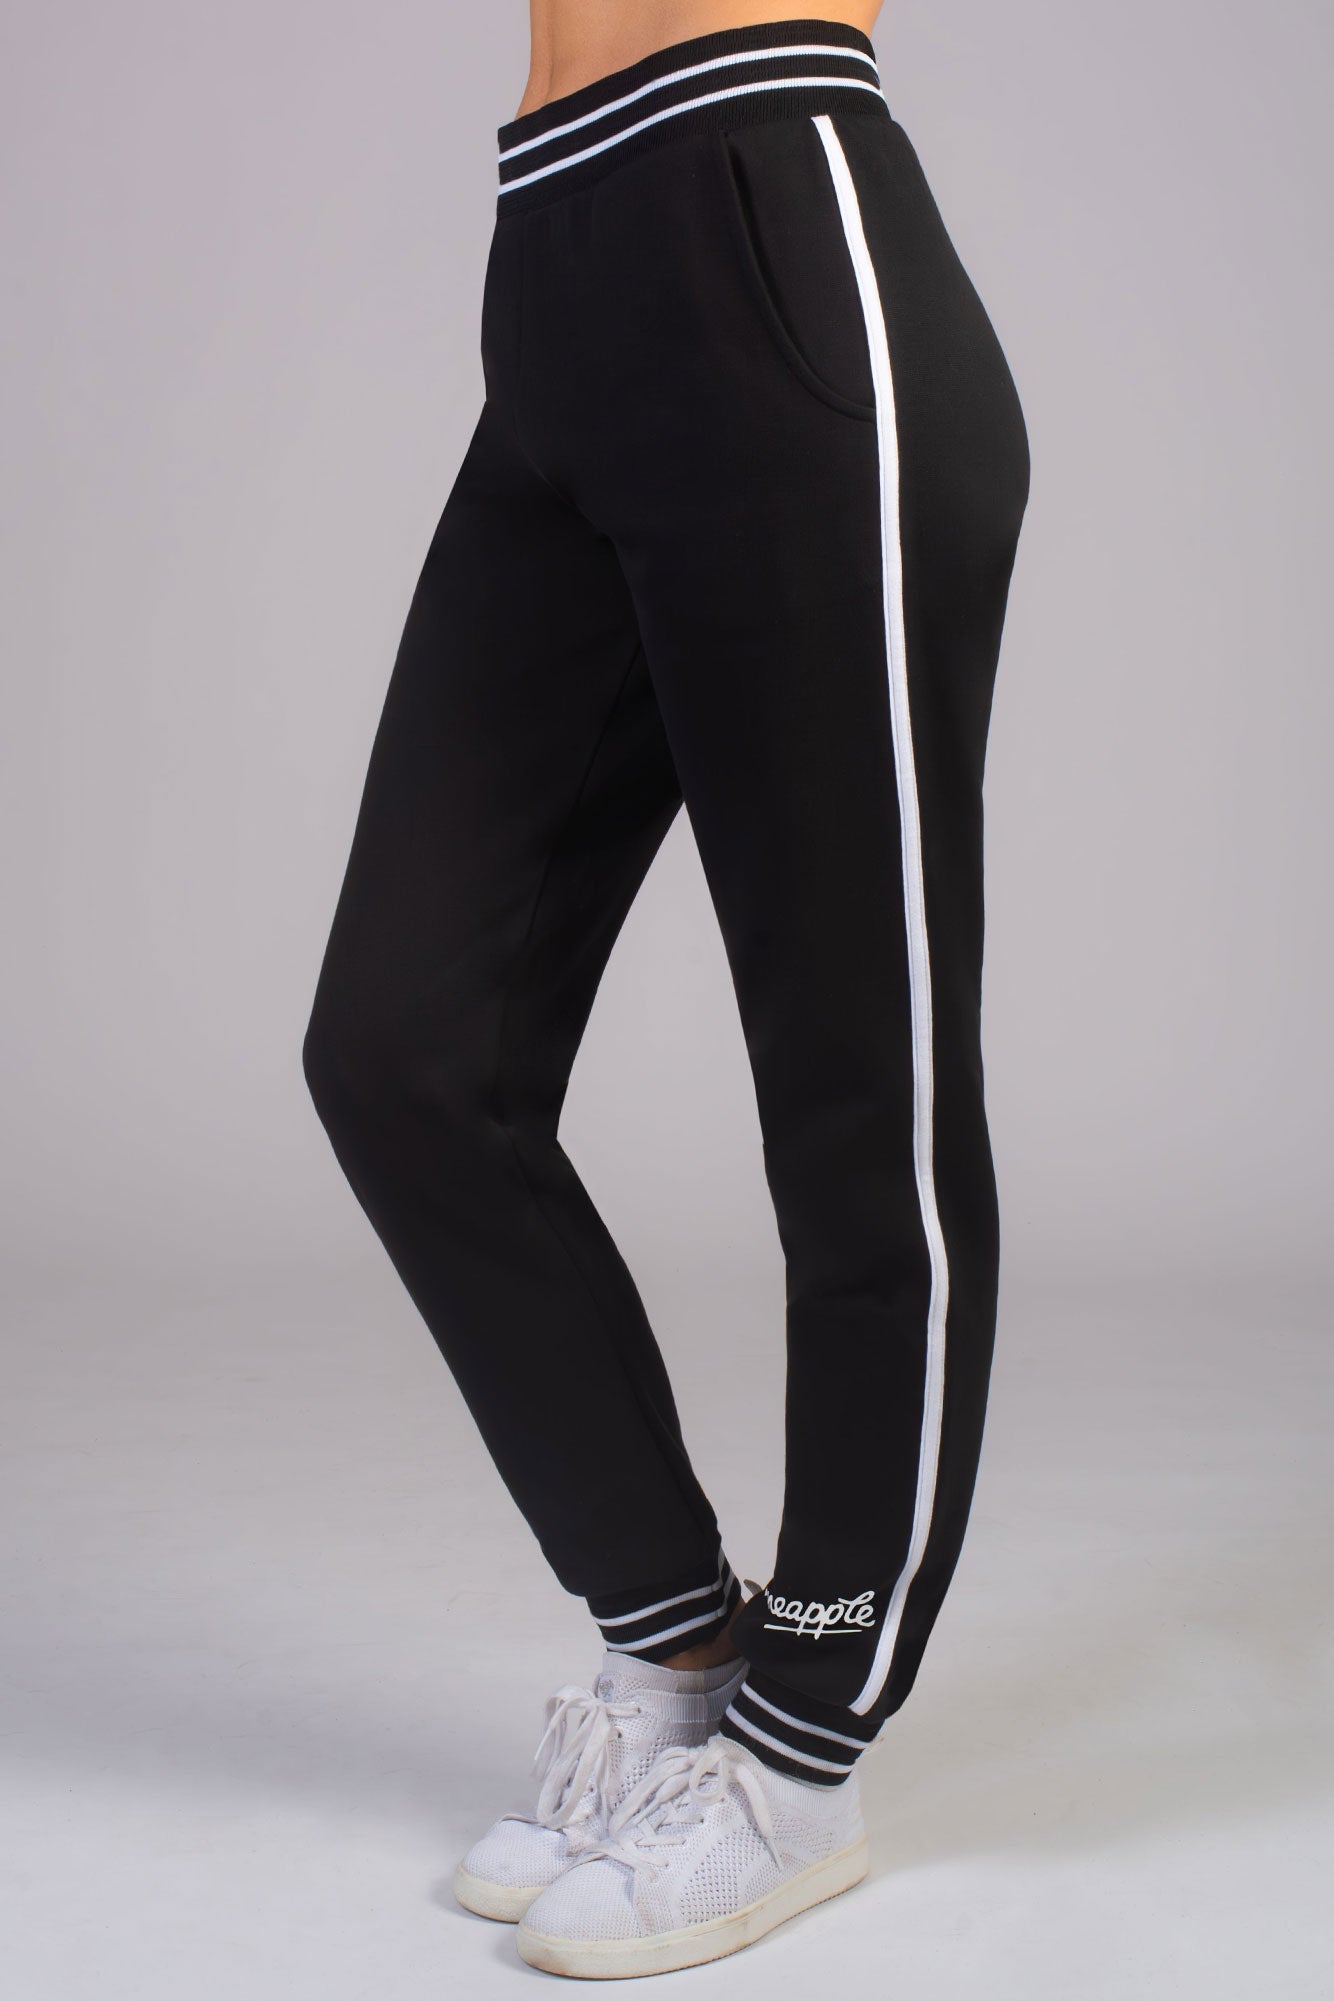 Women's Black Joggers With Stripe Rib Cuffs Co-ord Sets, 42% OFF